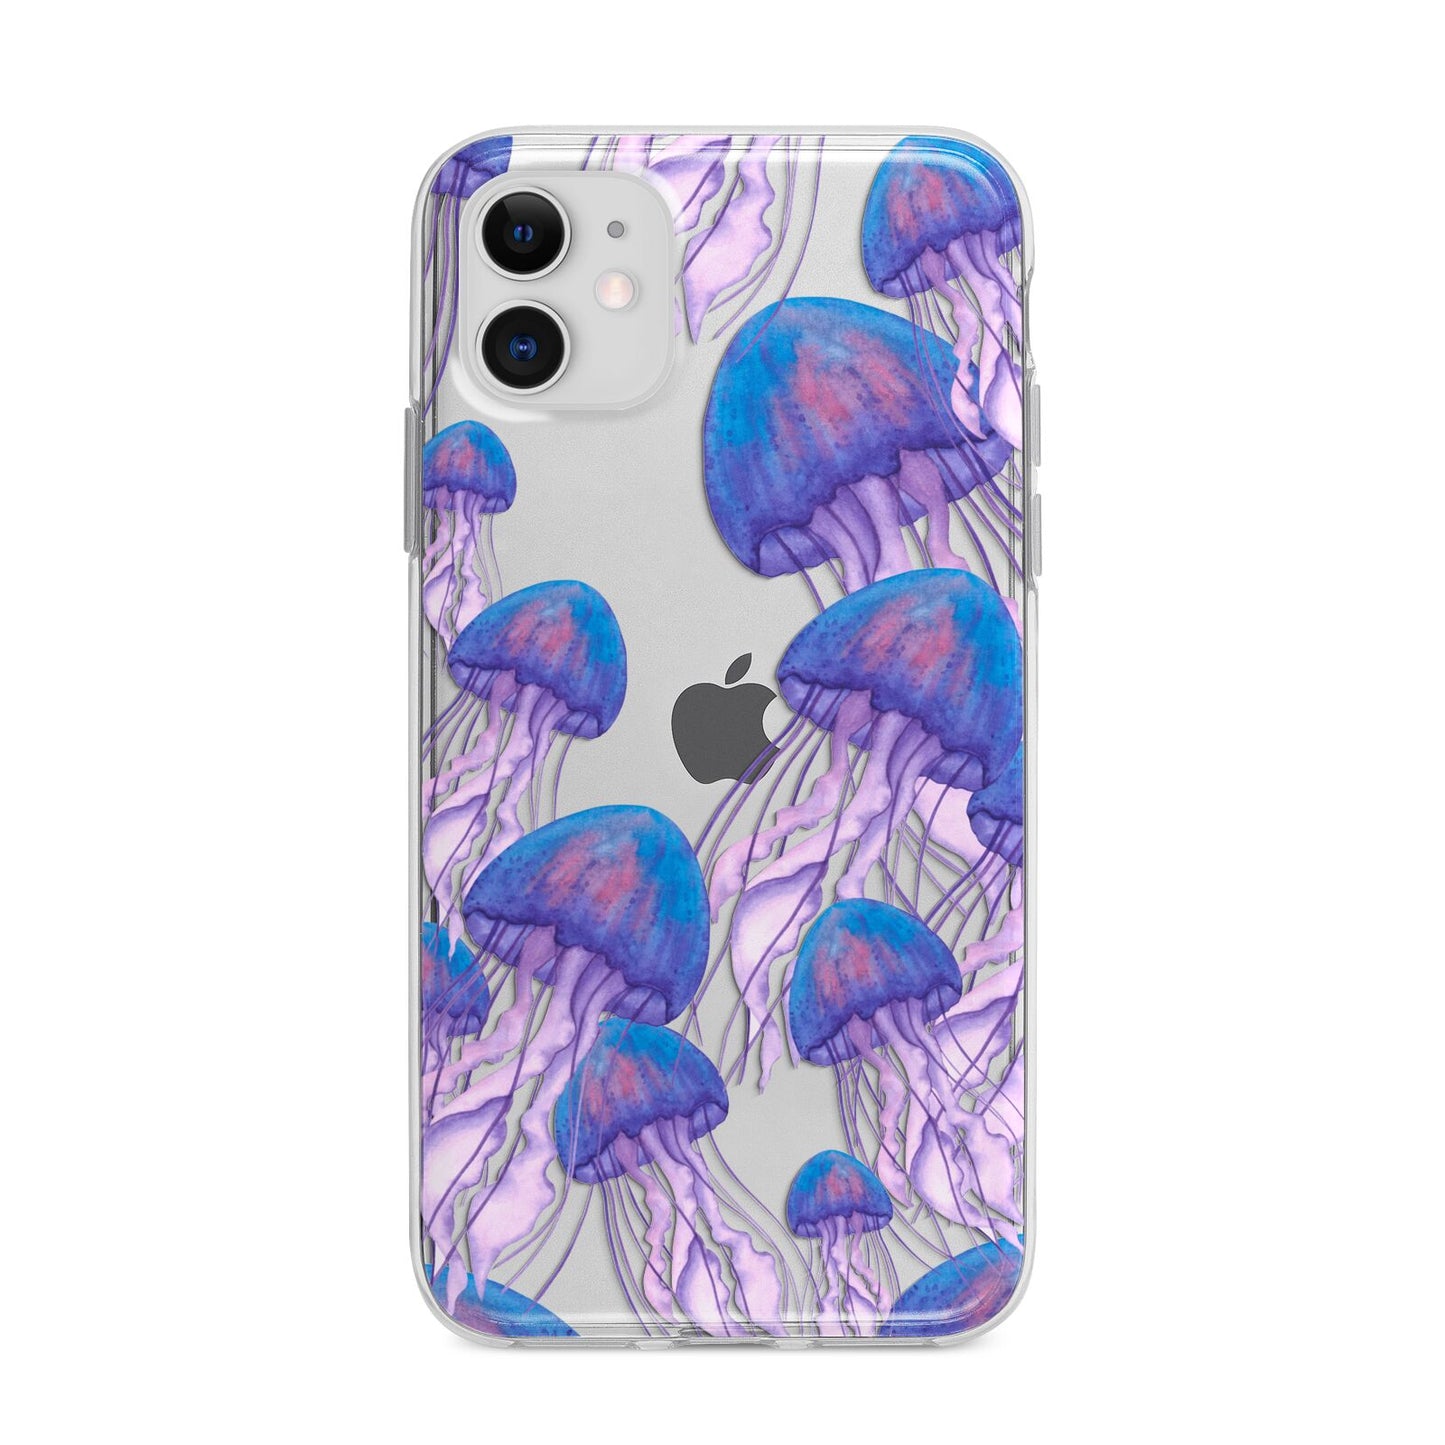 Jellyfish Apple iPhone 11 in White with Bumper Case